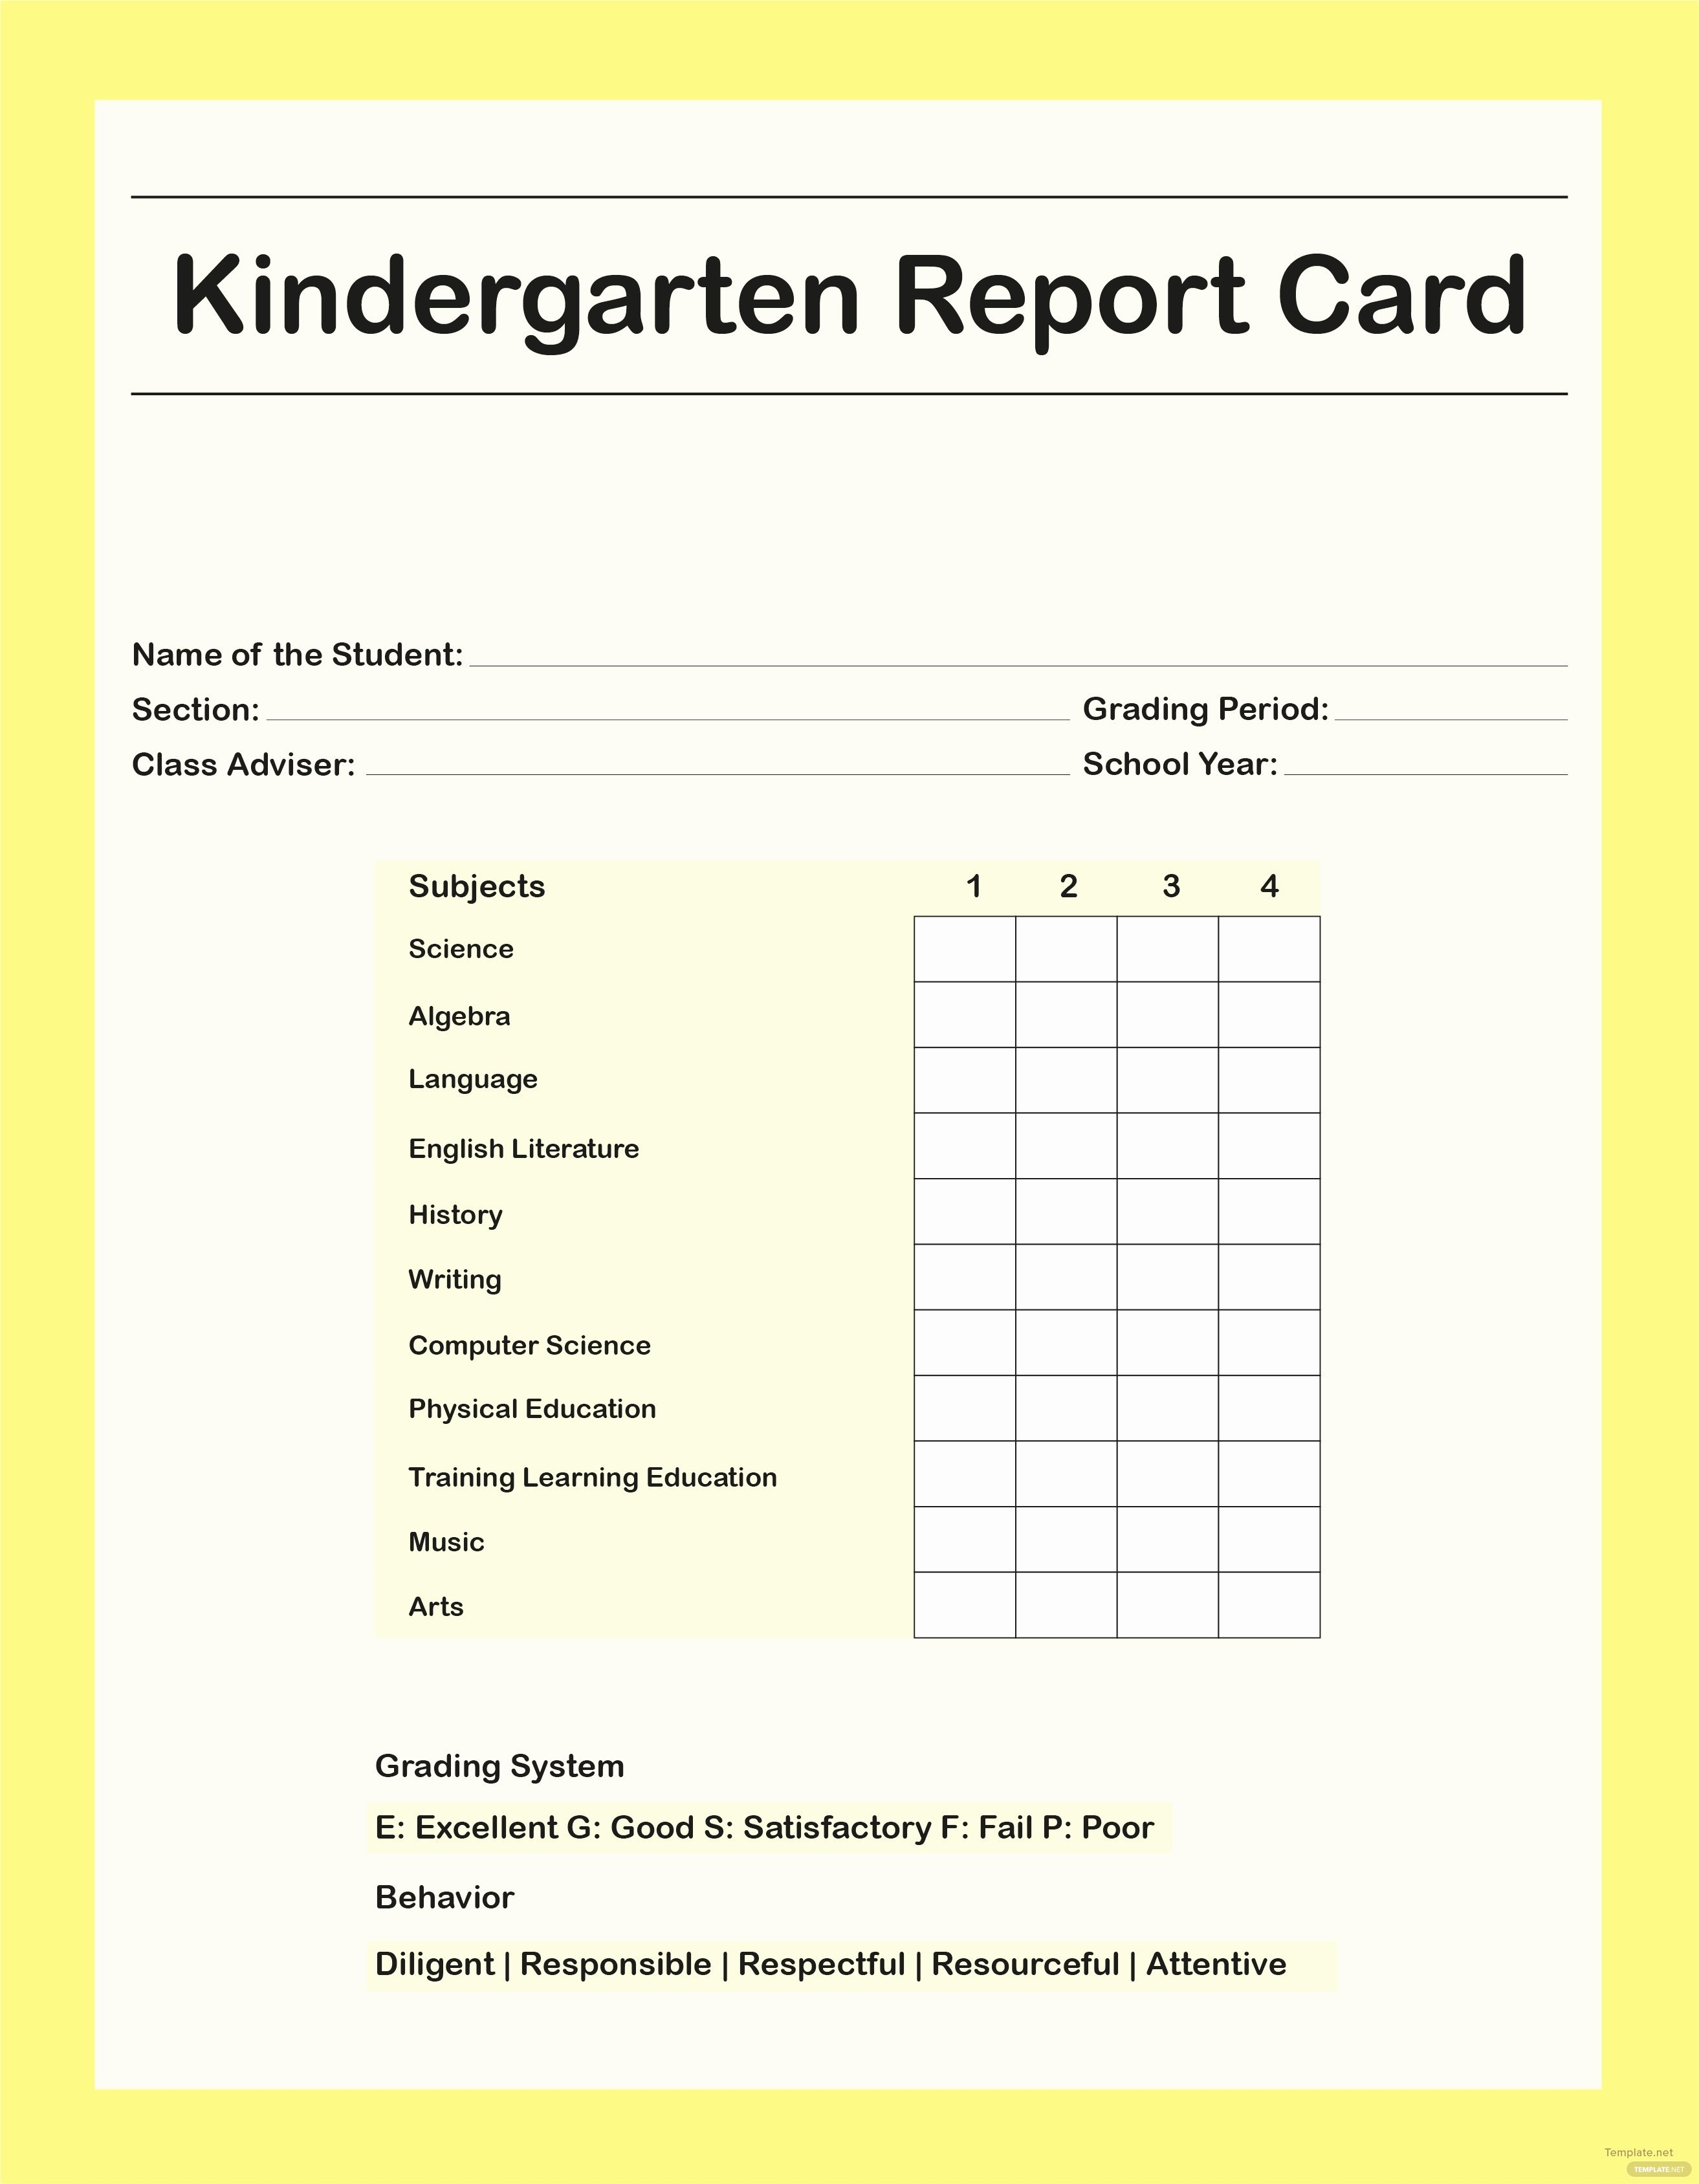 Free Report Card Template College For Omeschoolers Kindergarten High inside Report Card Template Pdf